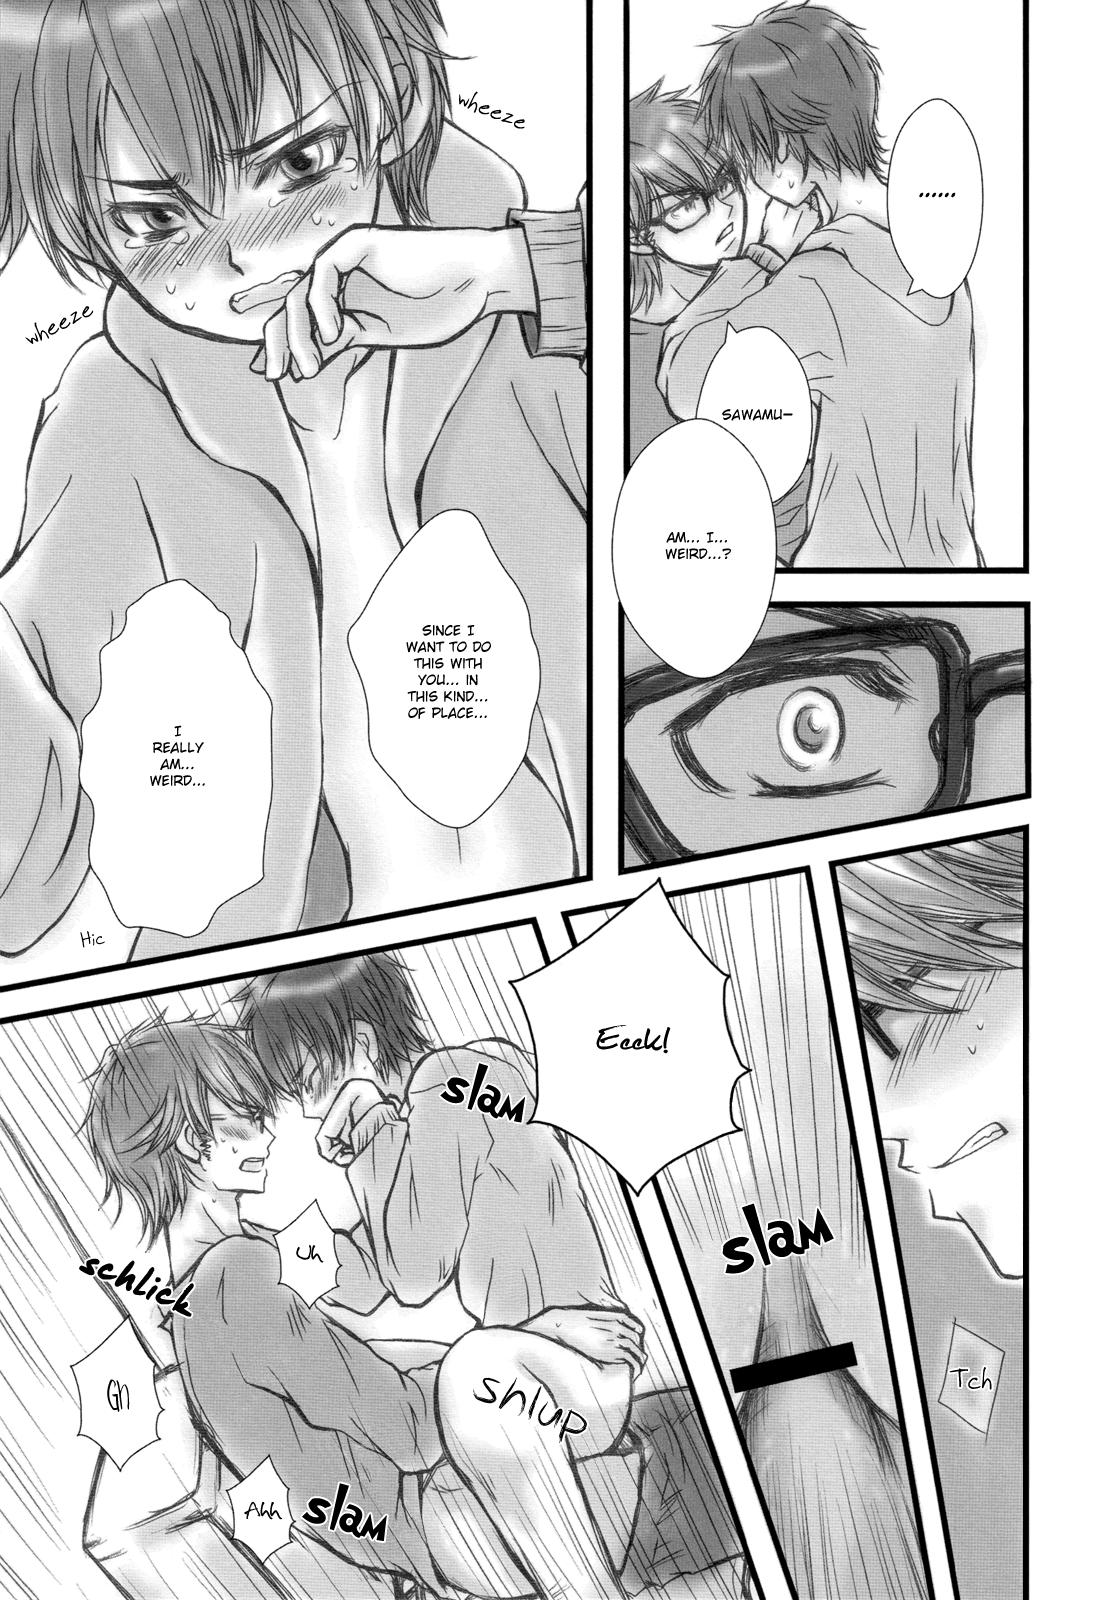 Transsexual Captain no Oshigoto | The Captain’s Work - Daiya no ace Jerk Off Instruction - Page 12